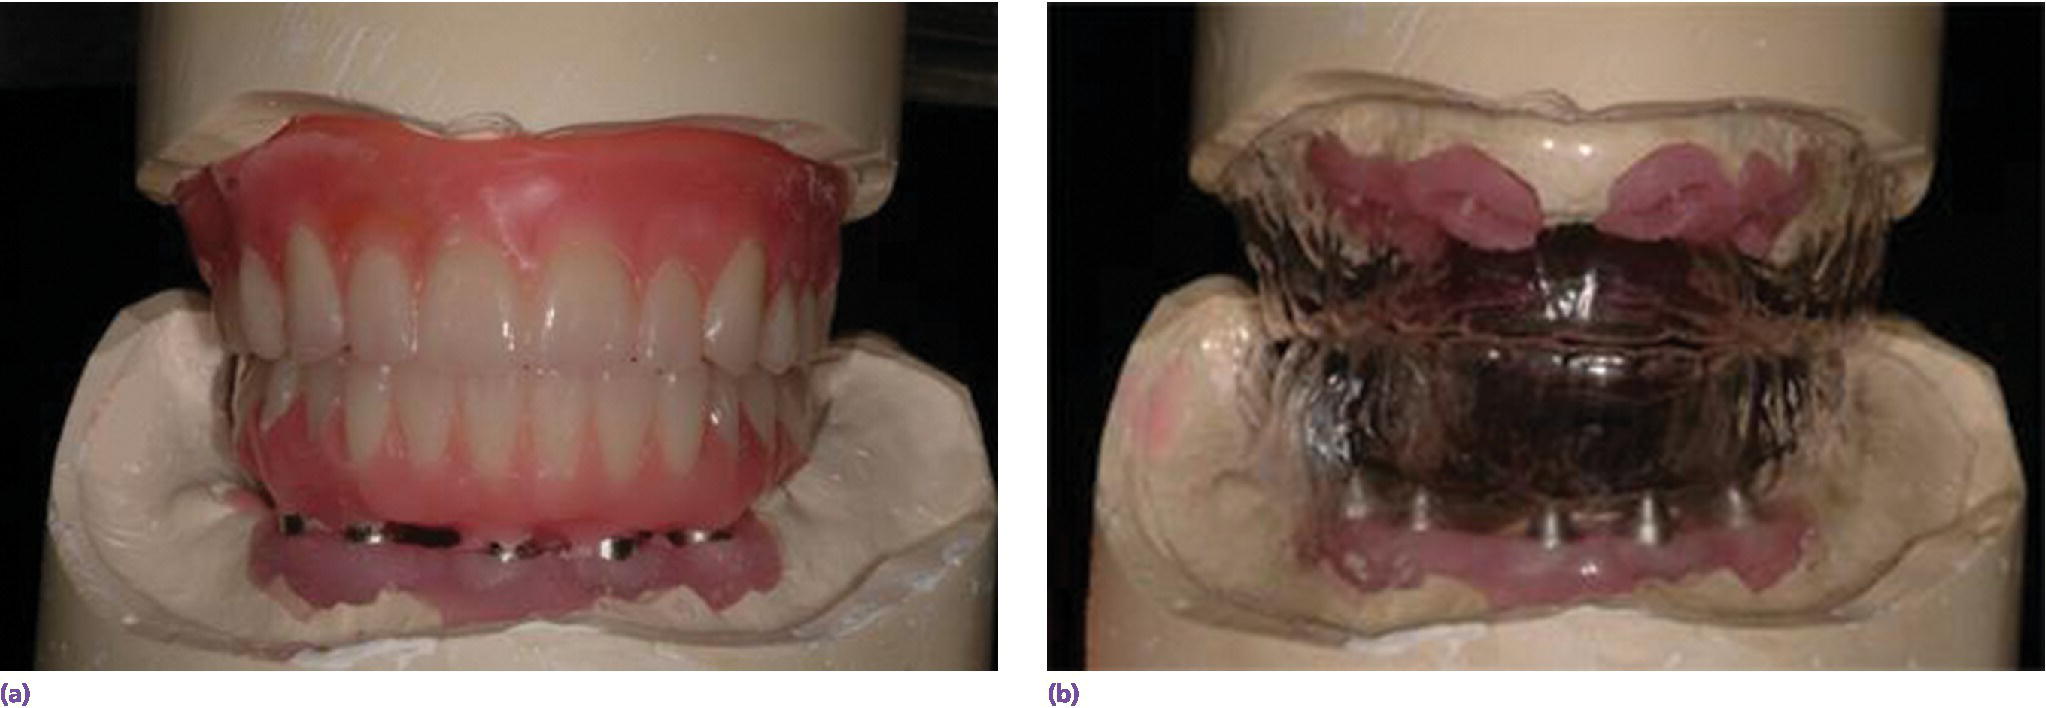 Photos of analog wax-up (top left), and wax-up permits spatial considerations for planning and fabricating maxillary and mandibular prostheses (top right).